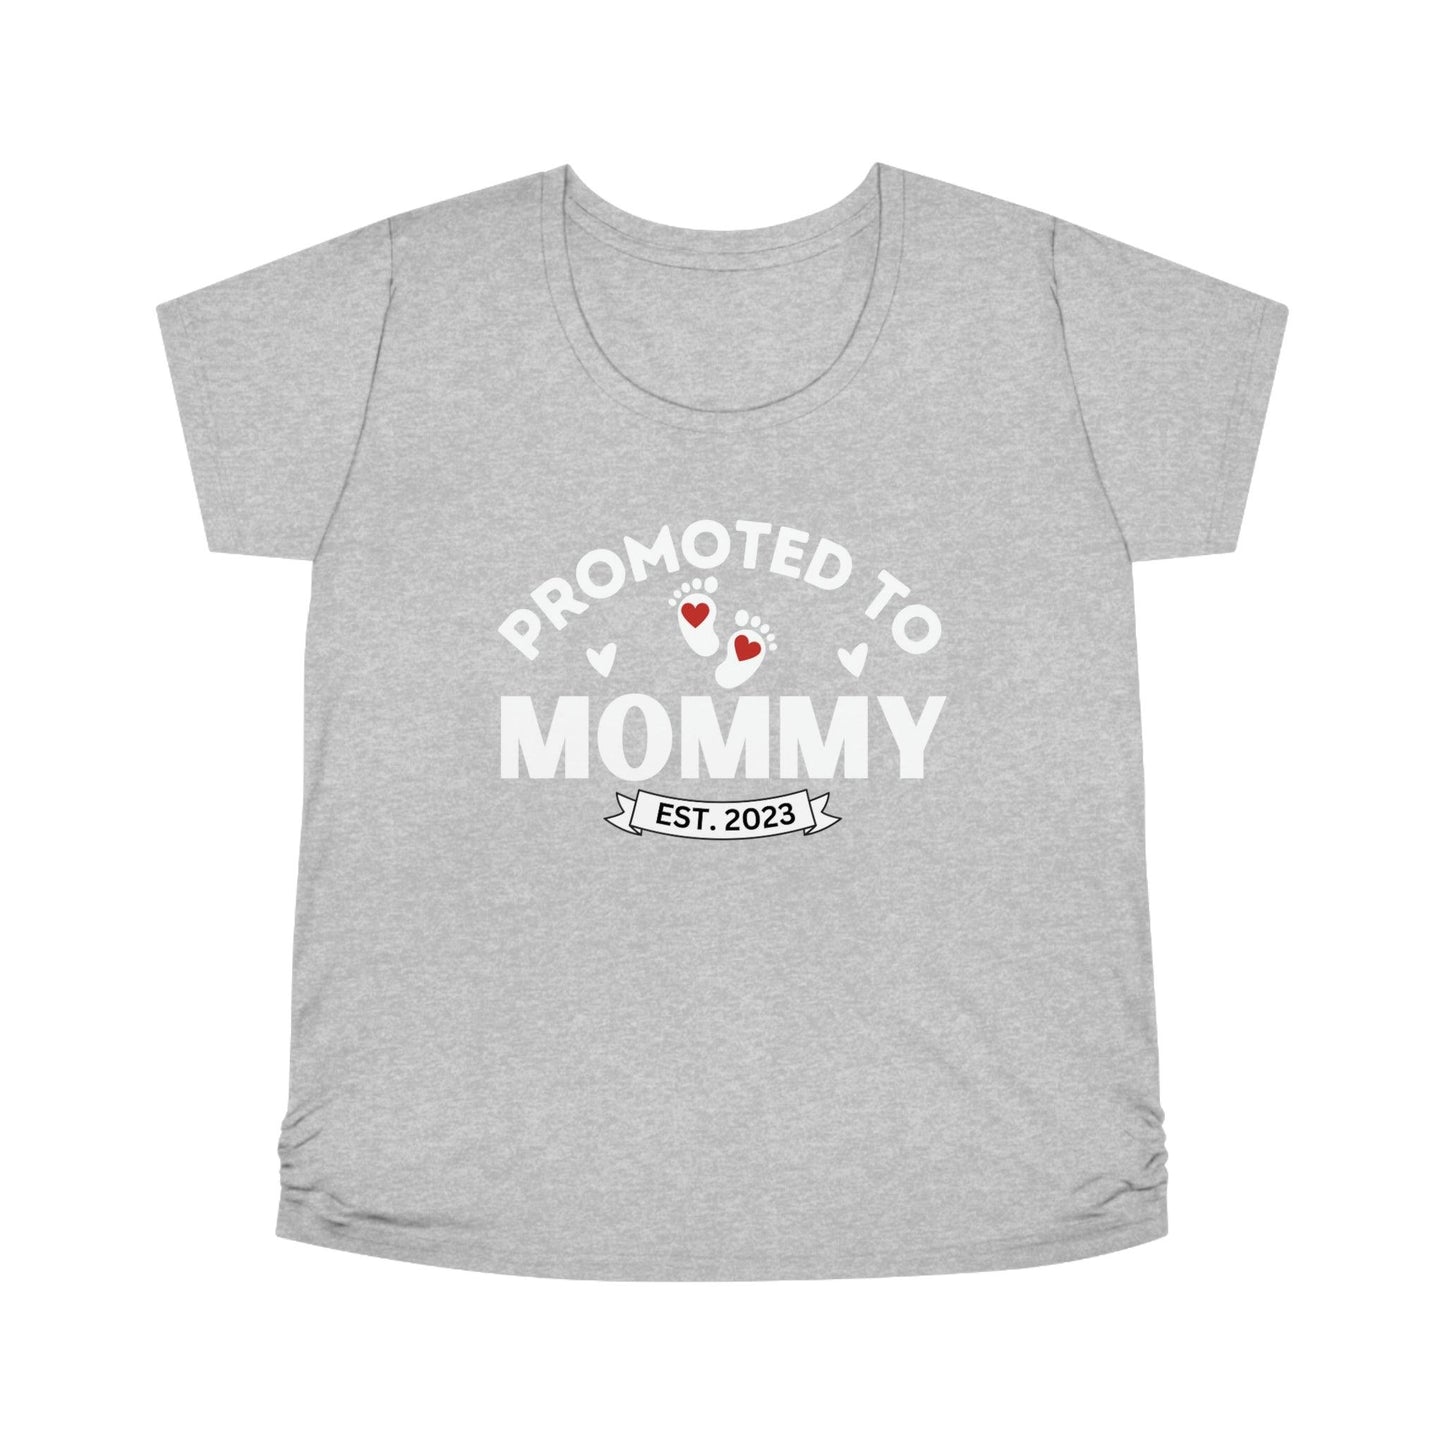 Promoted to Mommy shirt - New Mom tee - baby shower gift - Mom shirt -Women's Maternity Tee - Gift for new mom - mom to be gift - Giftsmojo